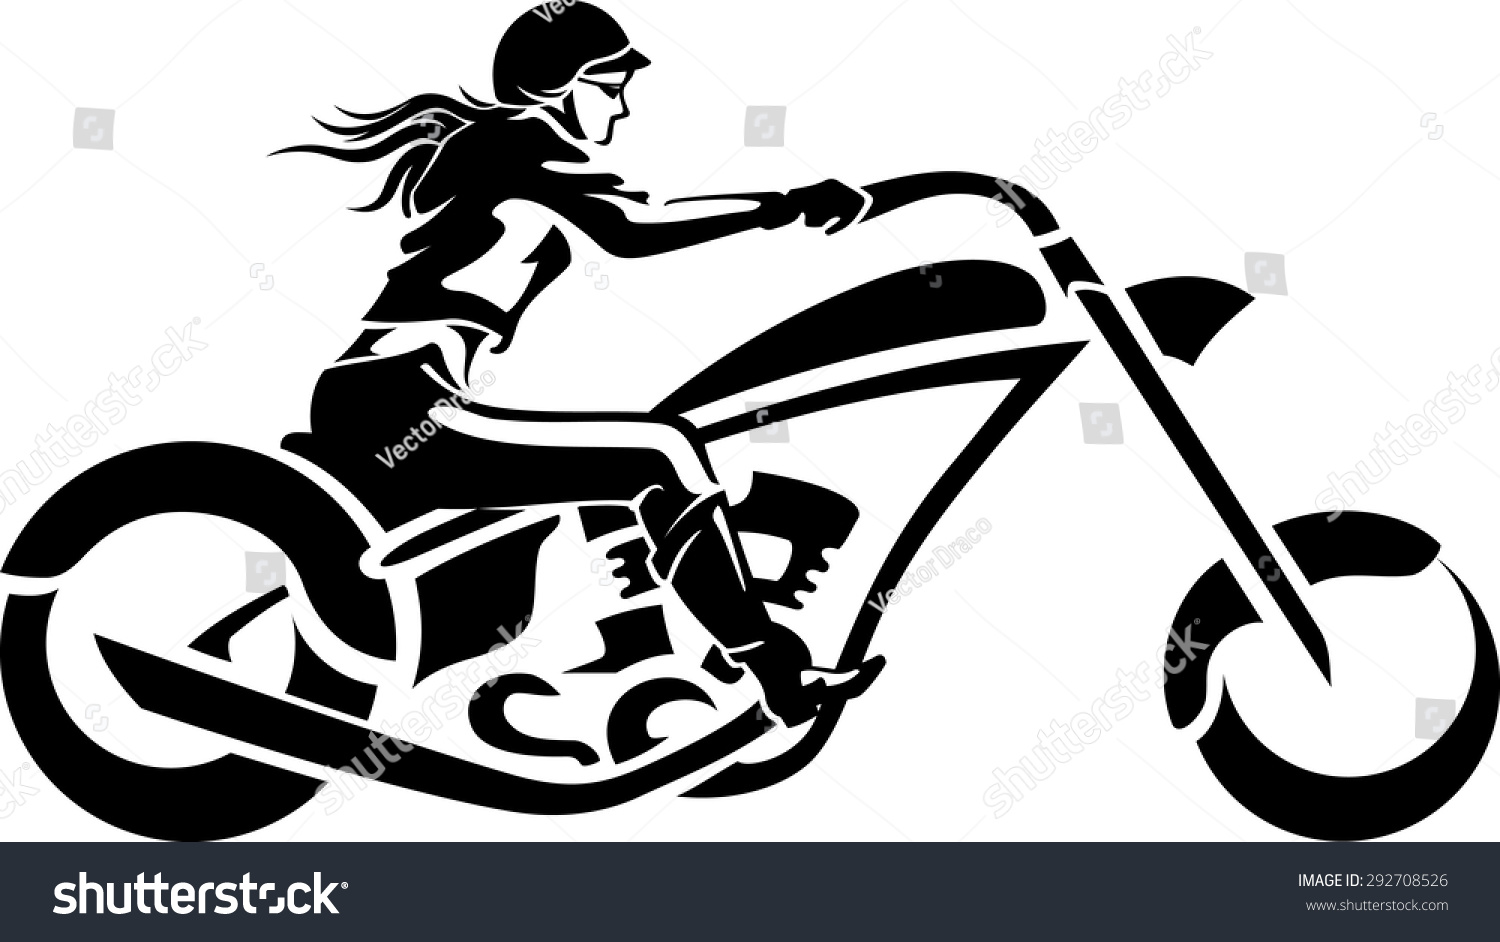 motorcycle clipart vector - photo #33